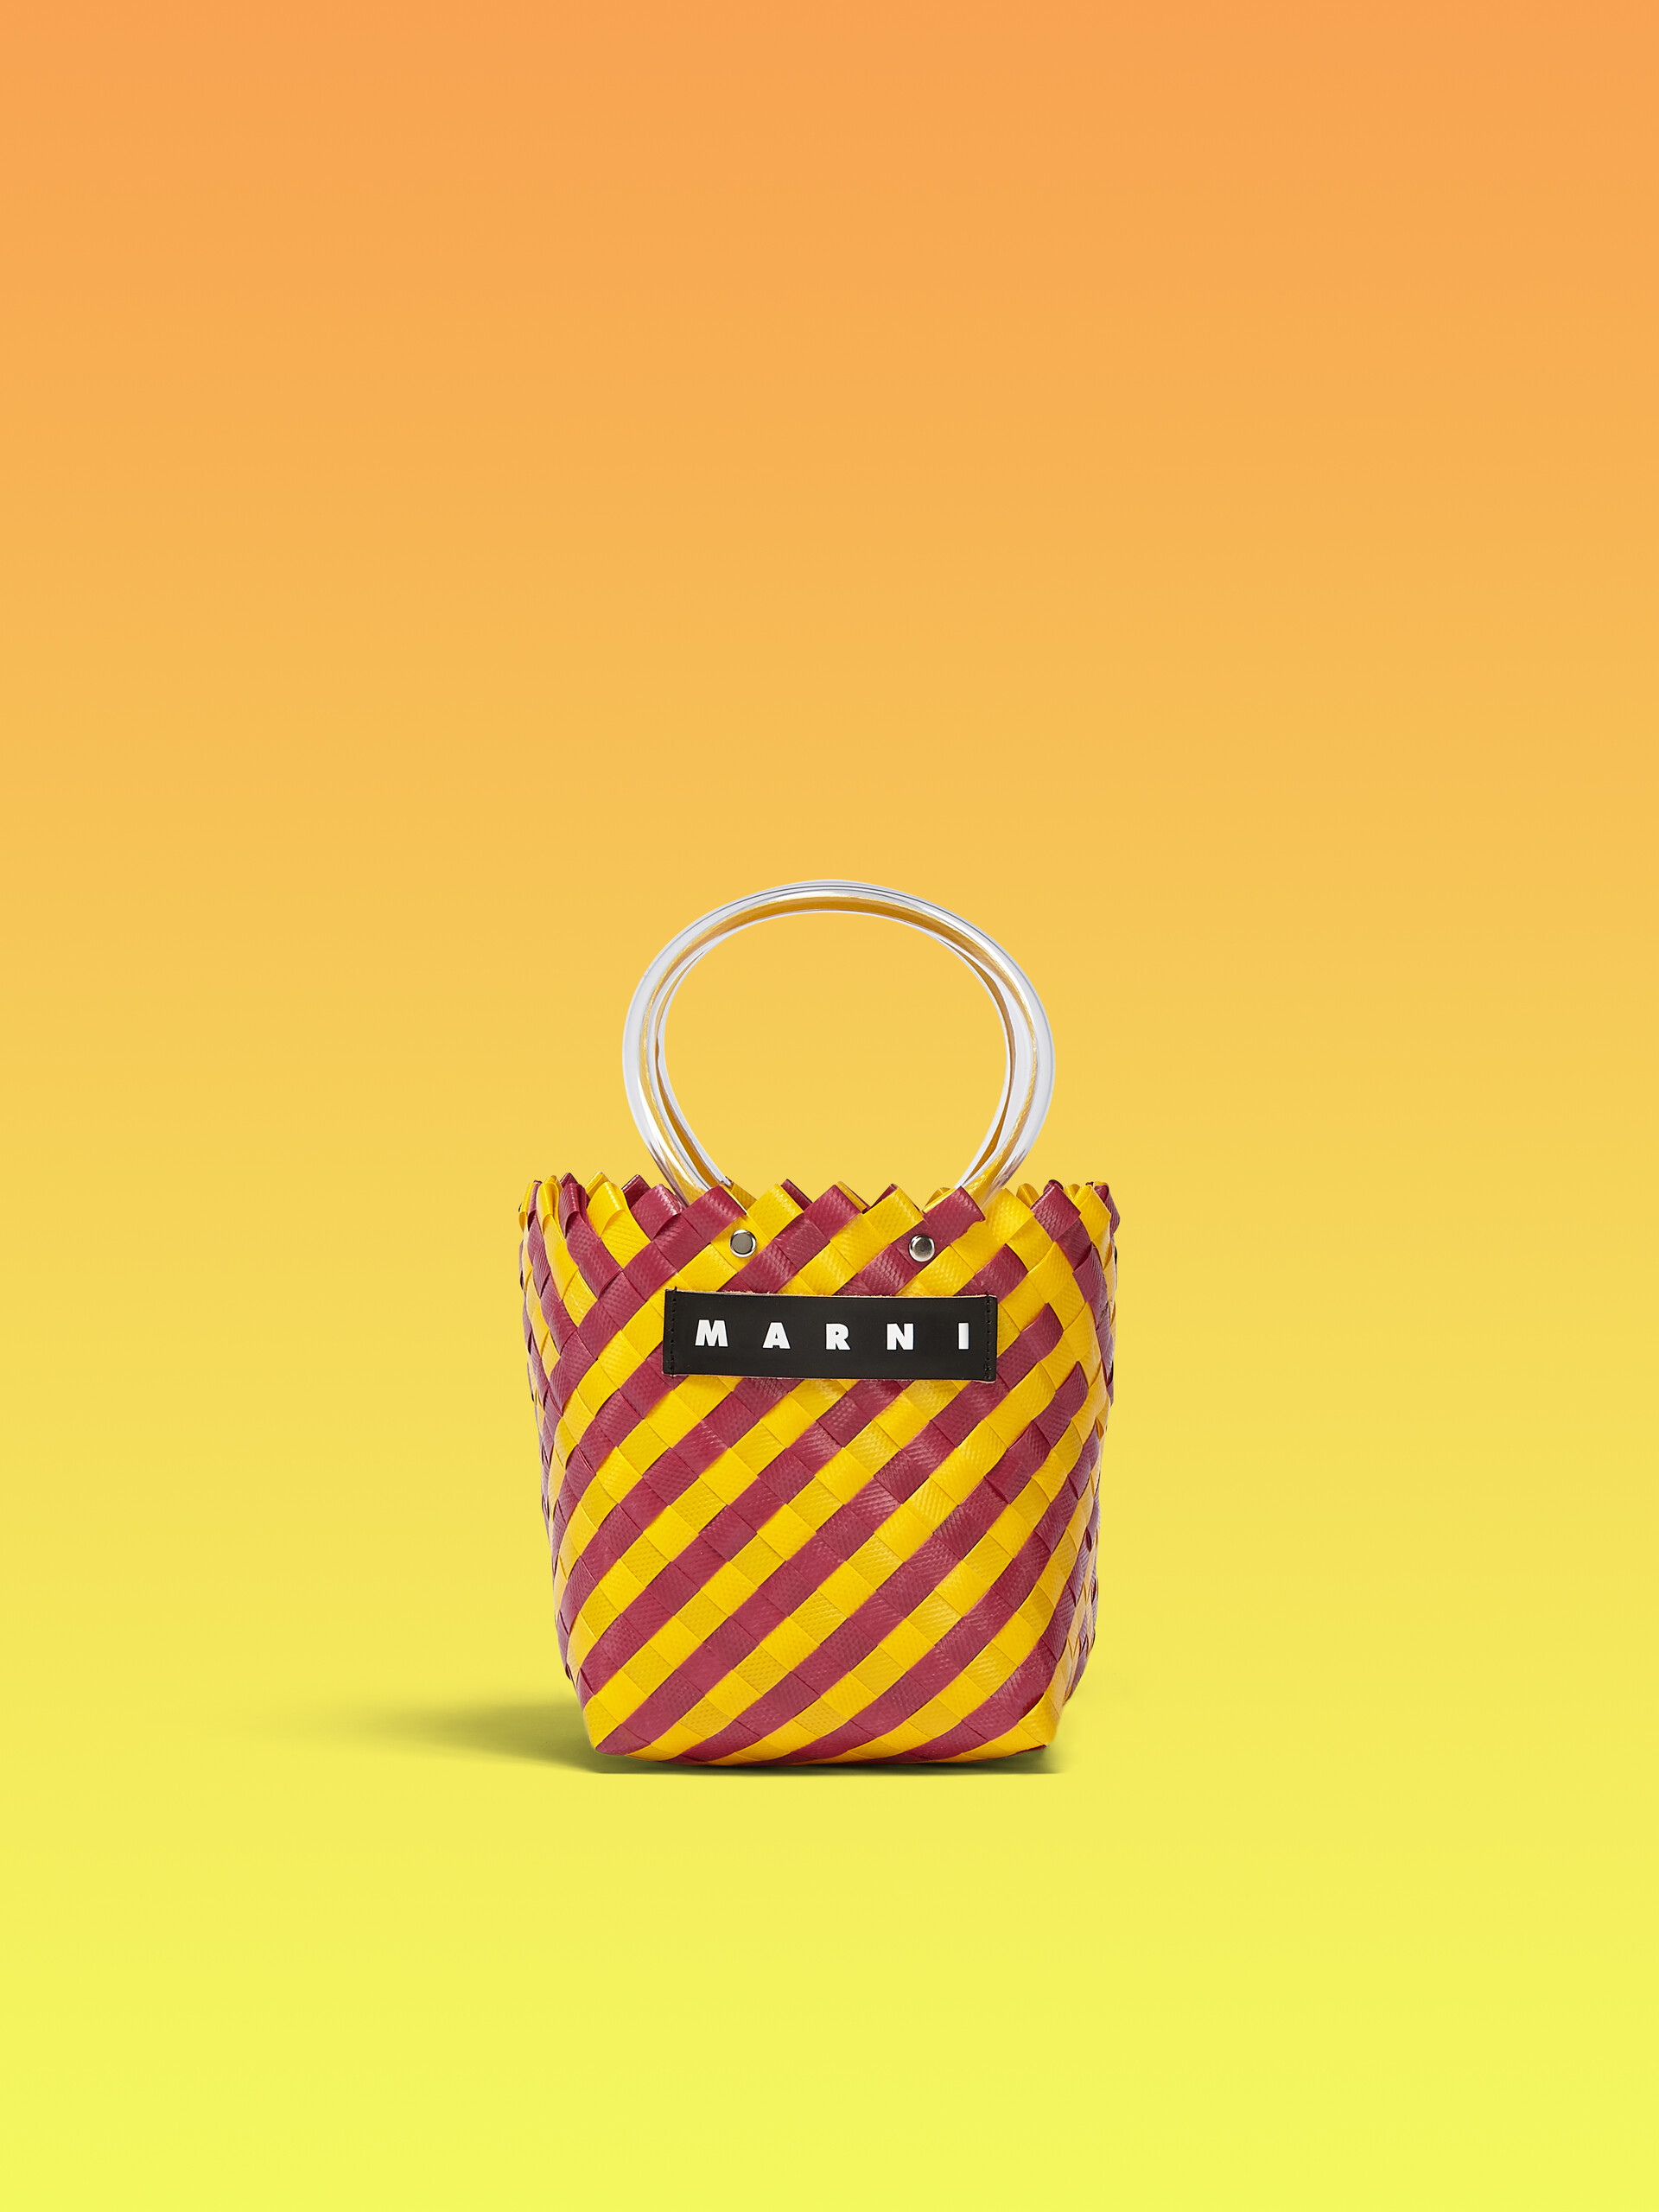 MARNI MARKET TAHA bag in yellow and burgundy woven material - Shopping Bags - Image 1